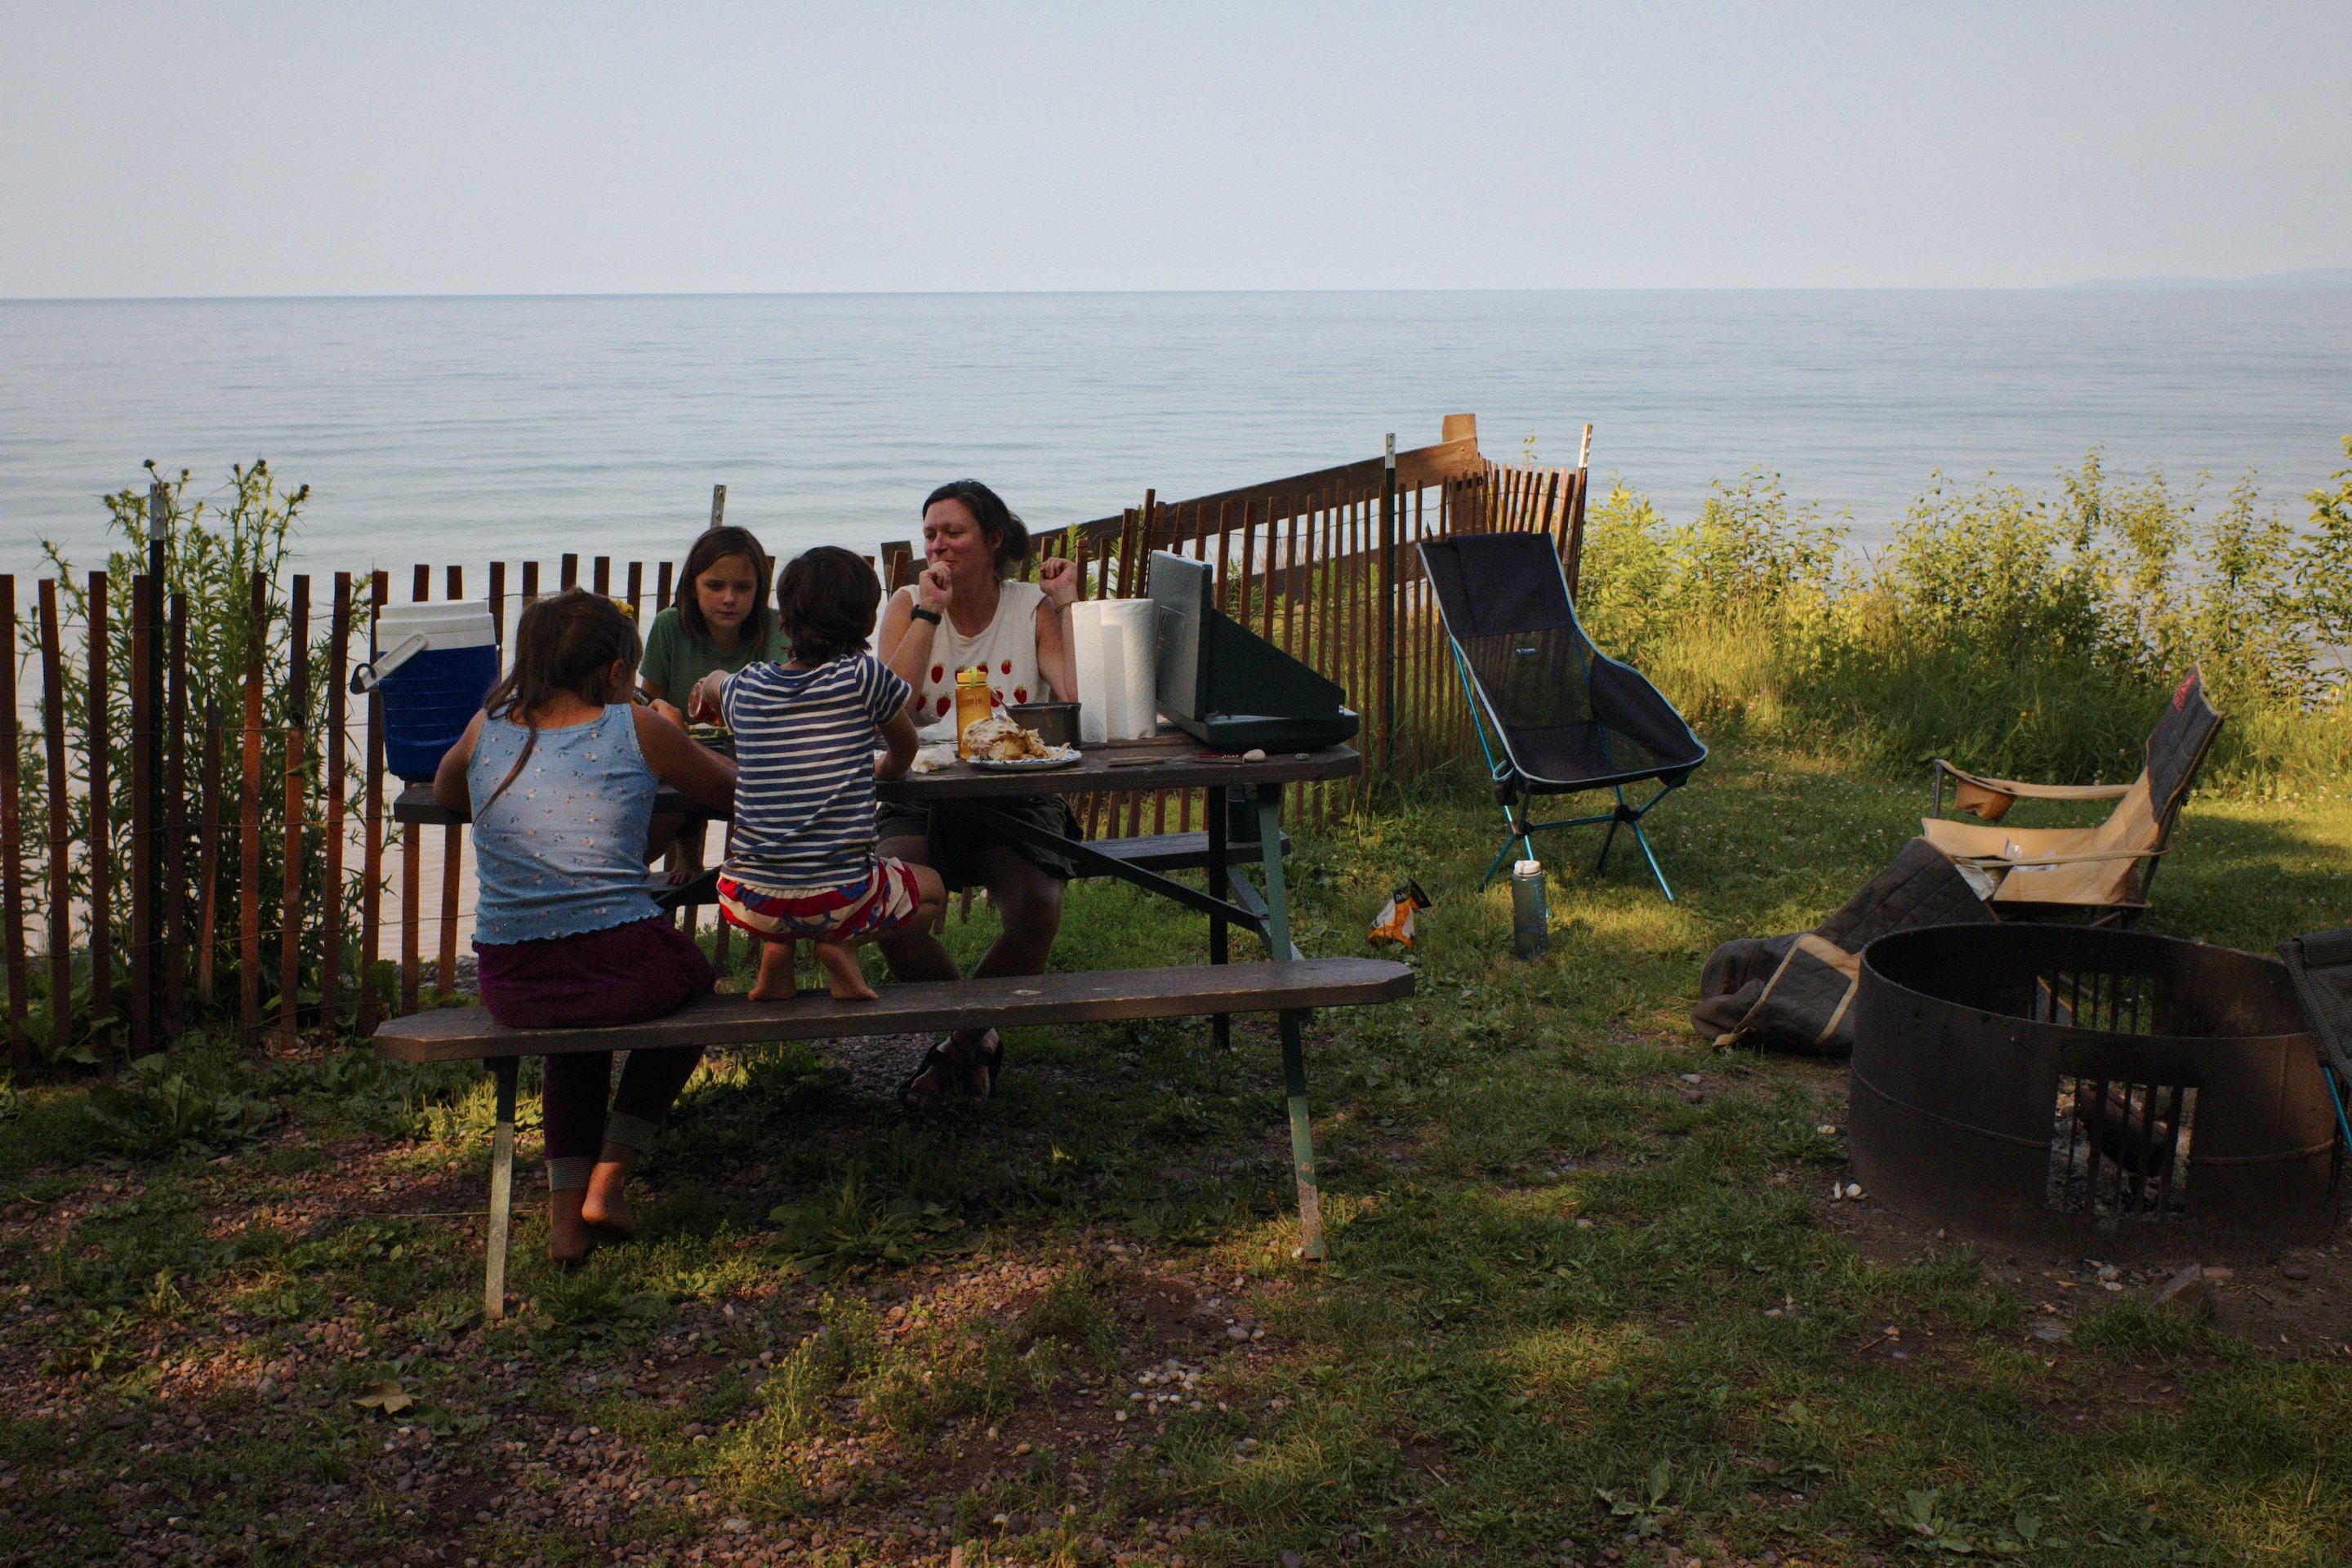 Dinner at our campsite overlooking Lake Superior photographed by luxagraf